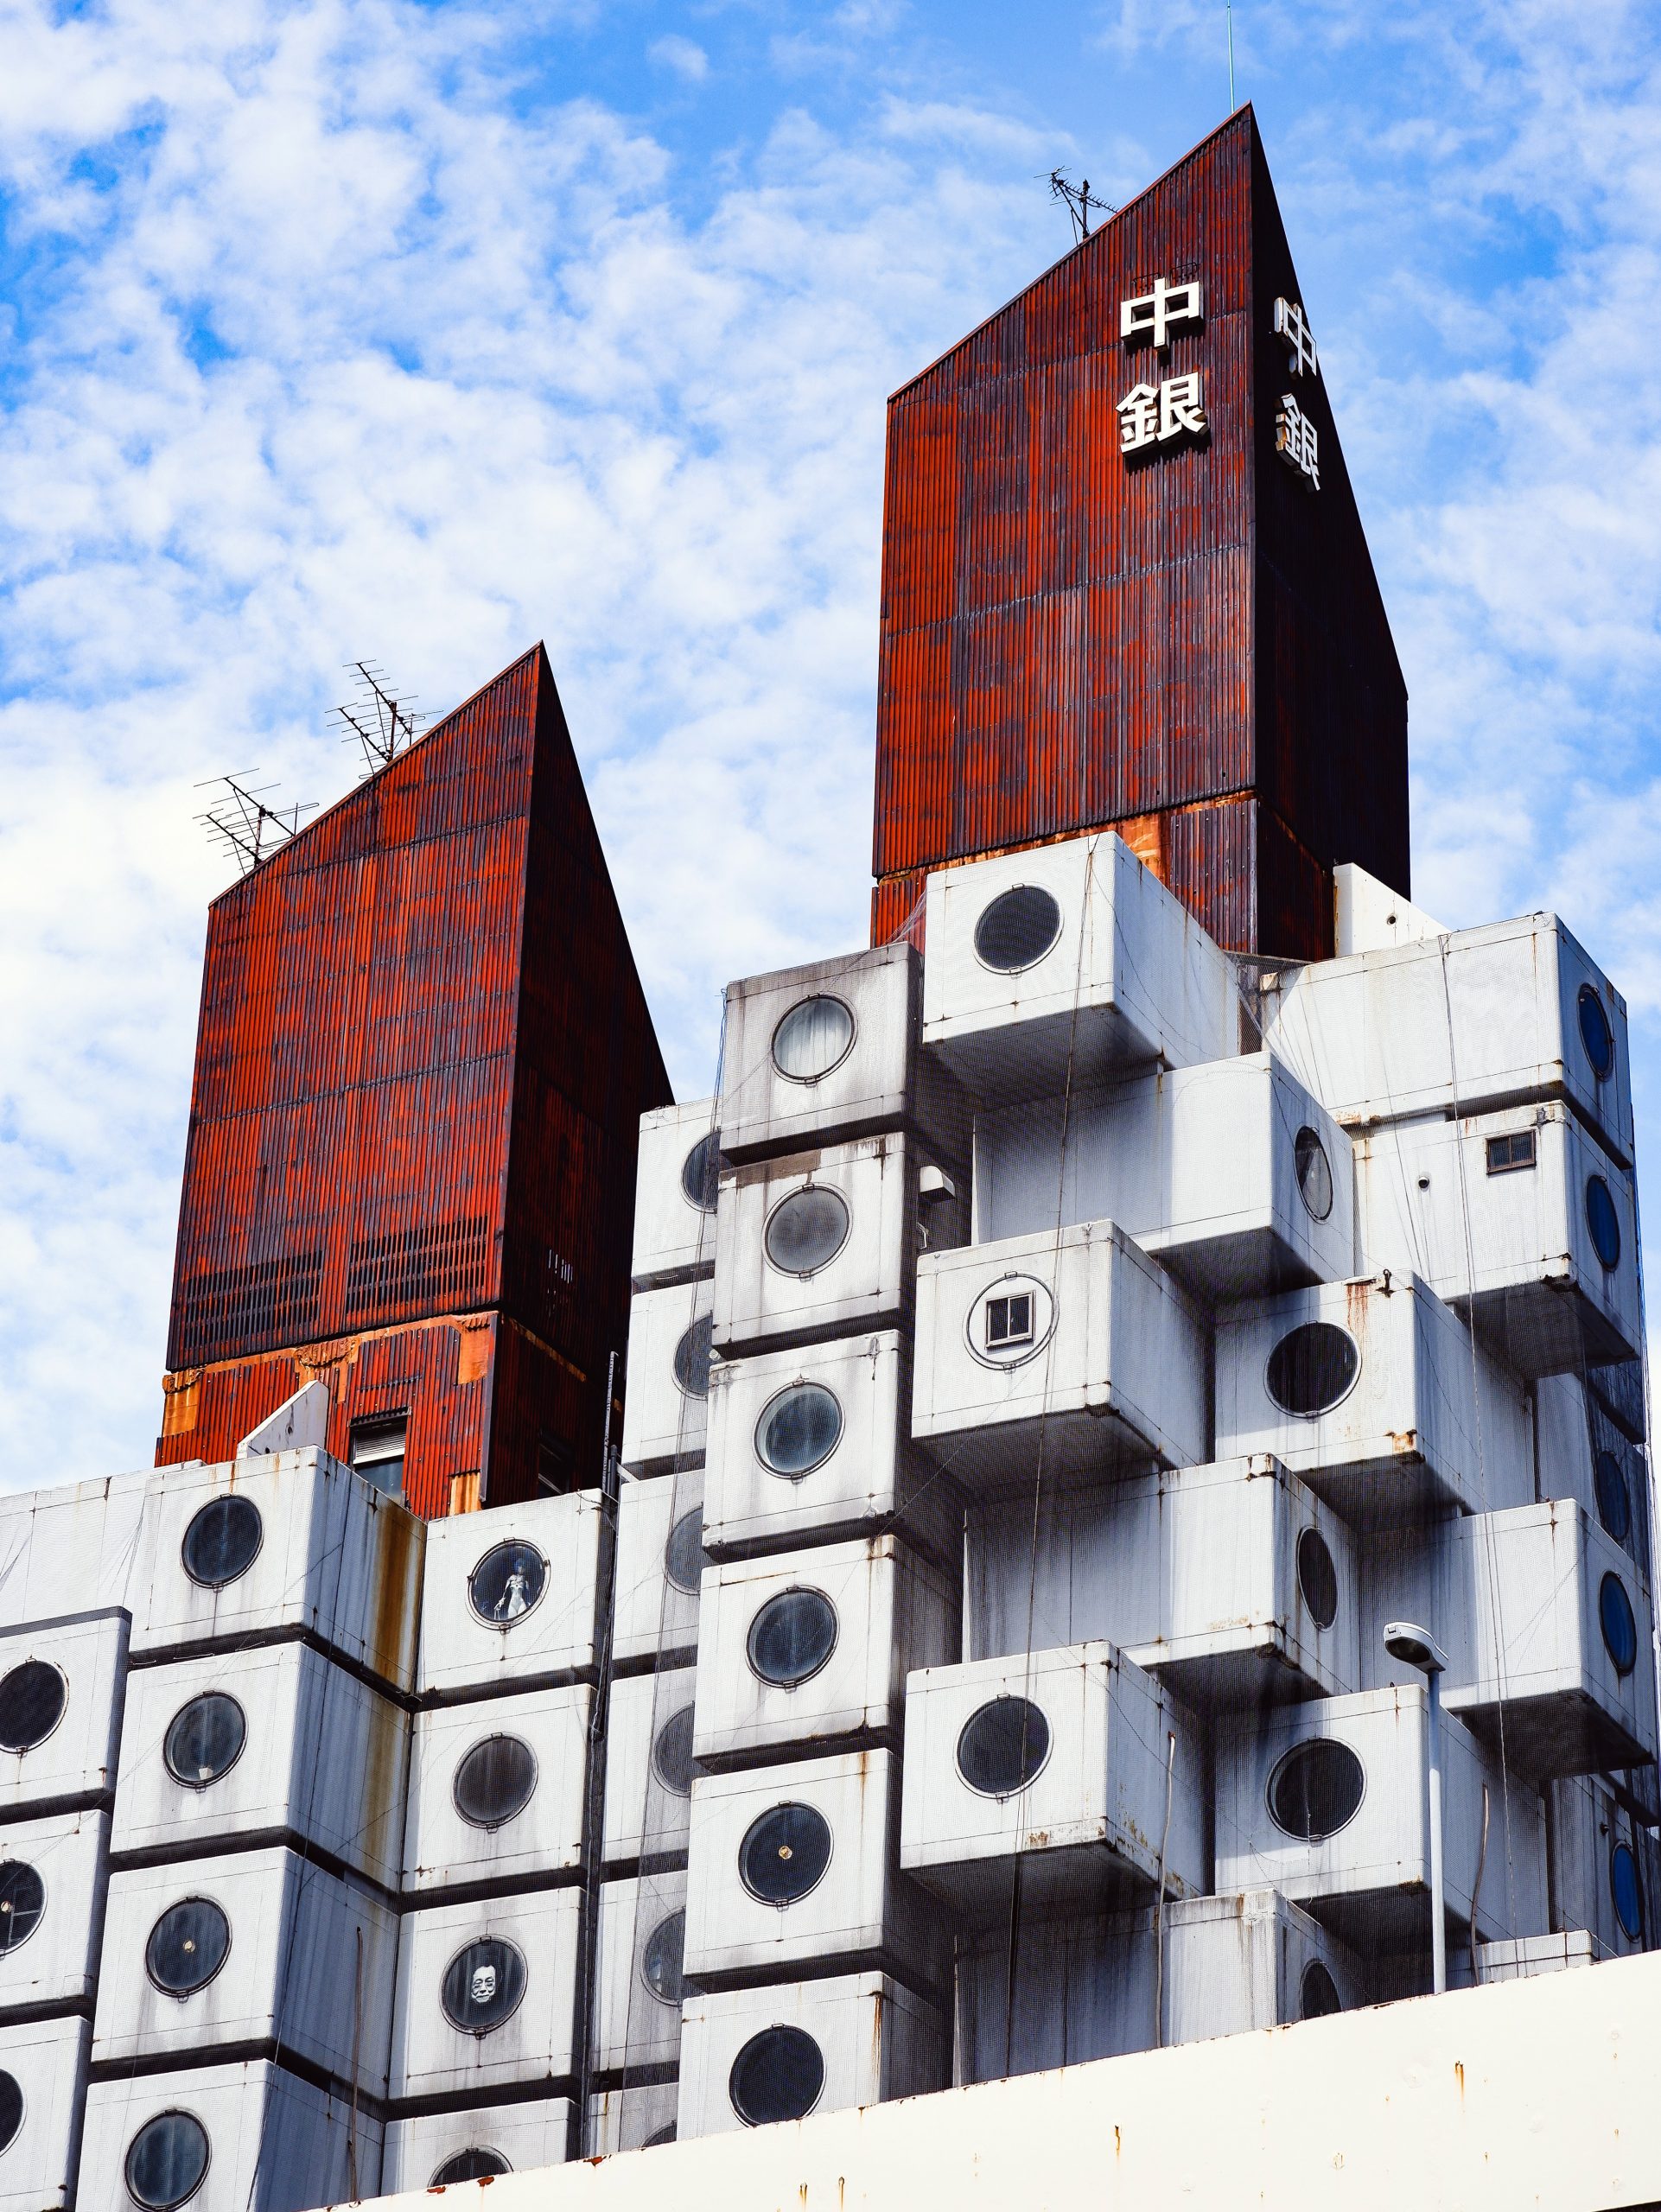 Exterior of the Nakagin Capsule Tower. Photo by Susann Schuster via Unsplash